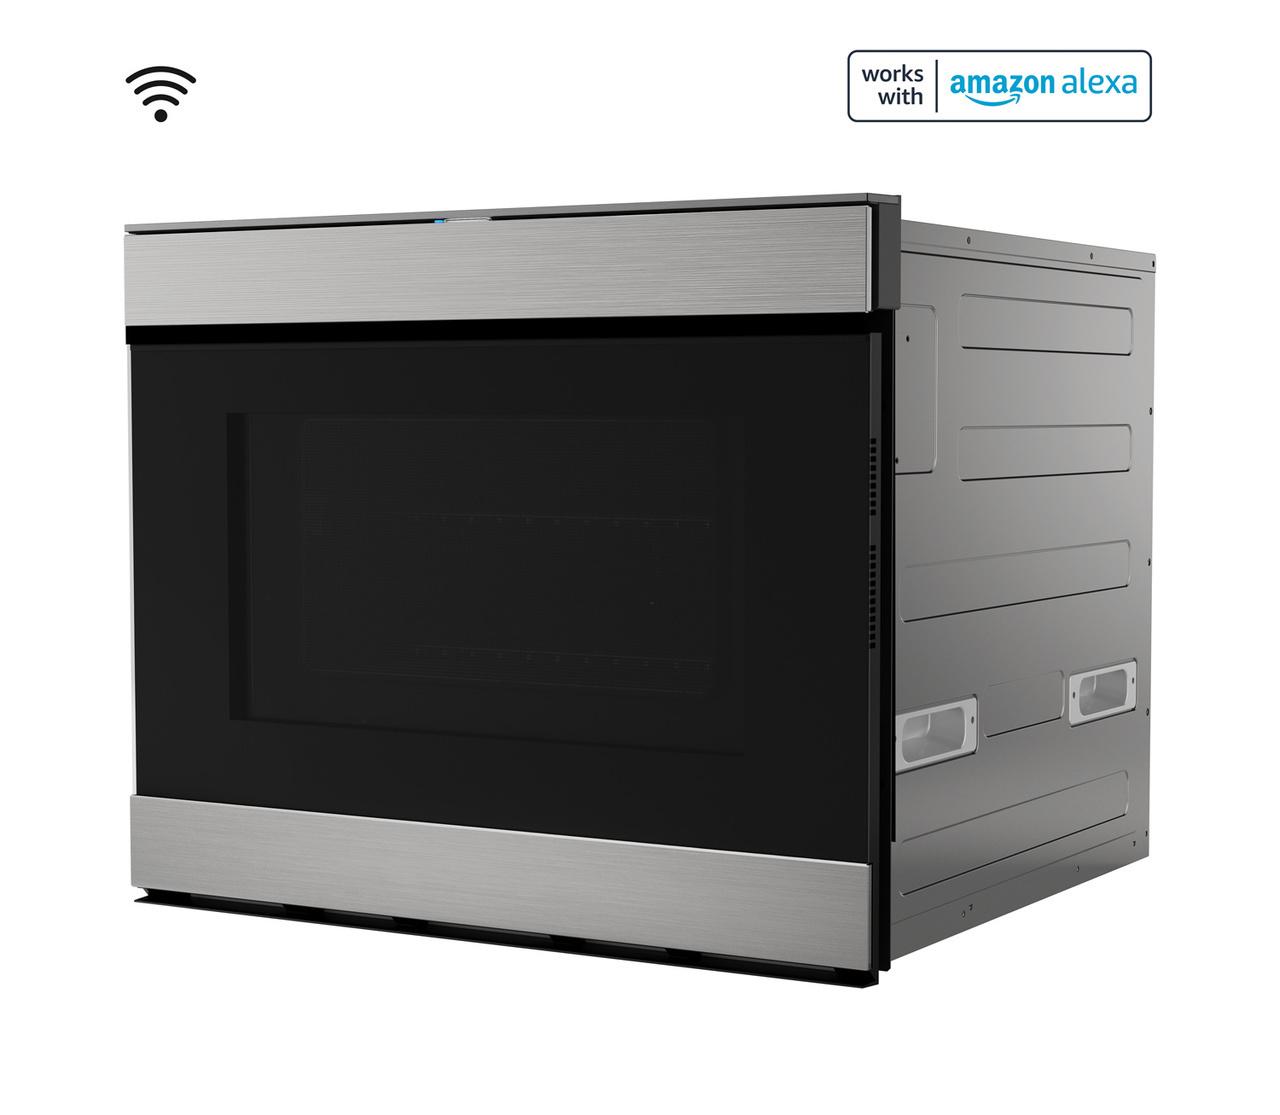 Smart Radiant Rangetop with Microwave Drawer Oven (STR3065HS)